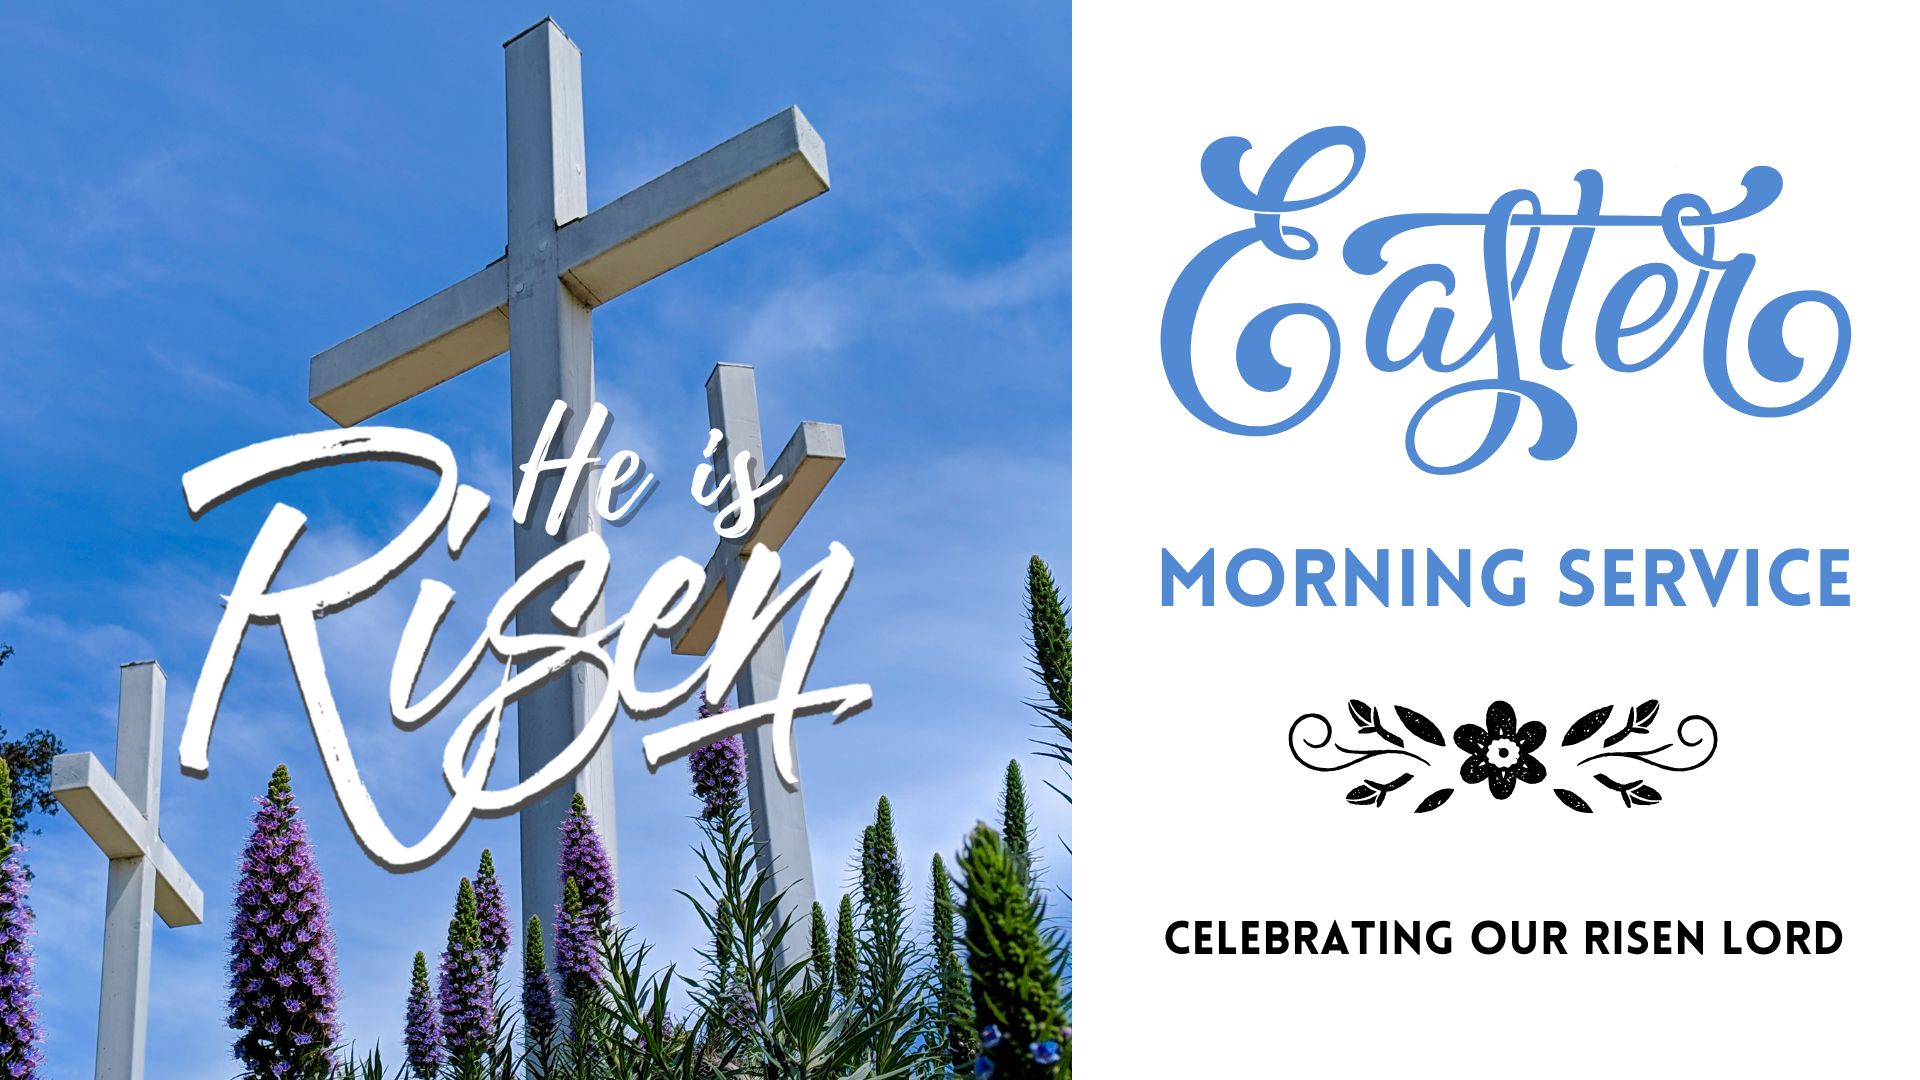 Easter Service march 31 10:30 am